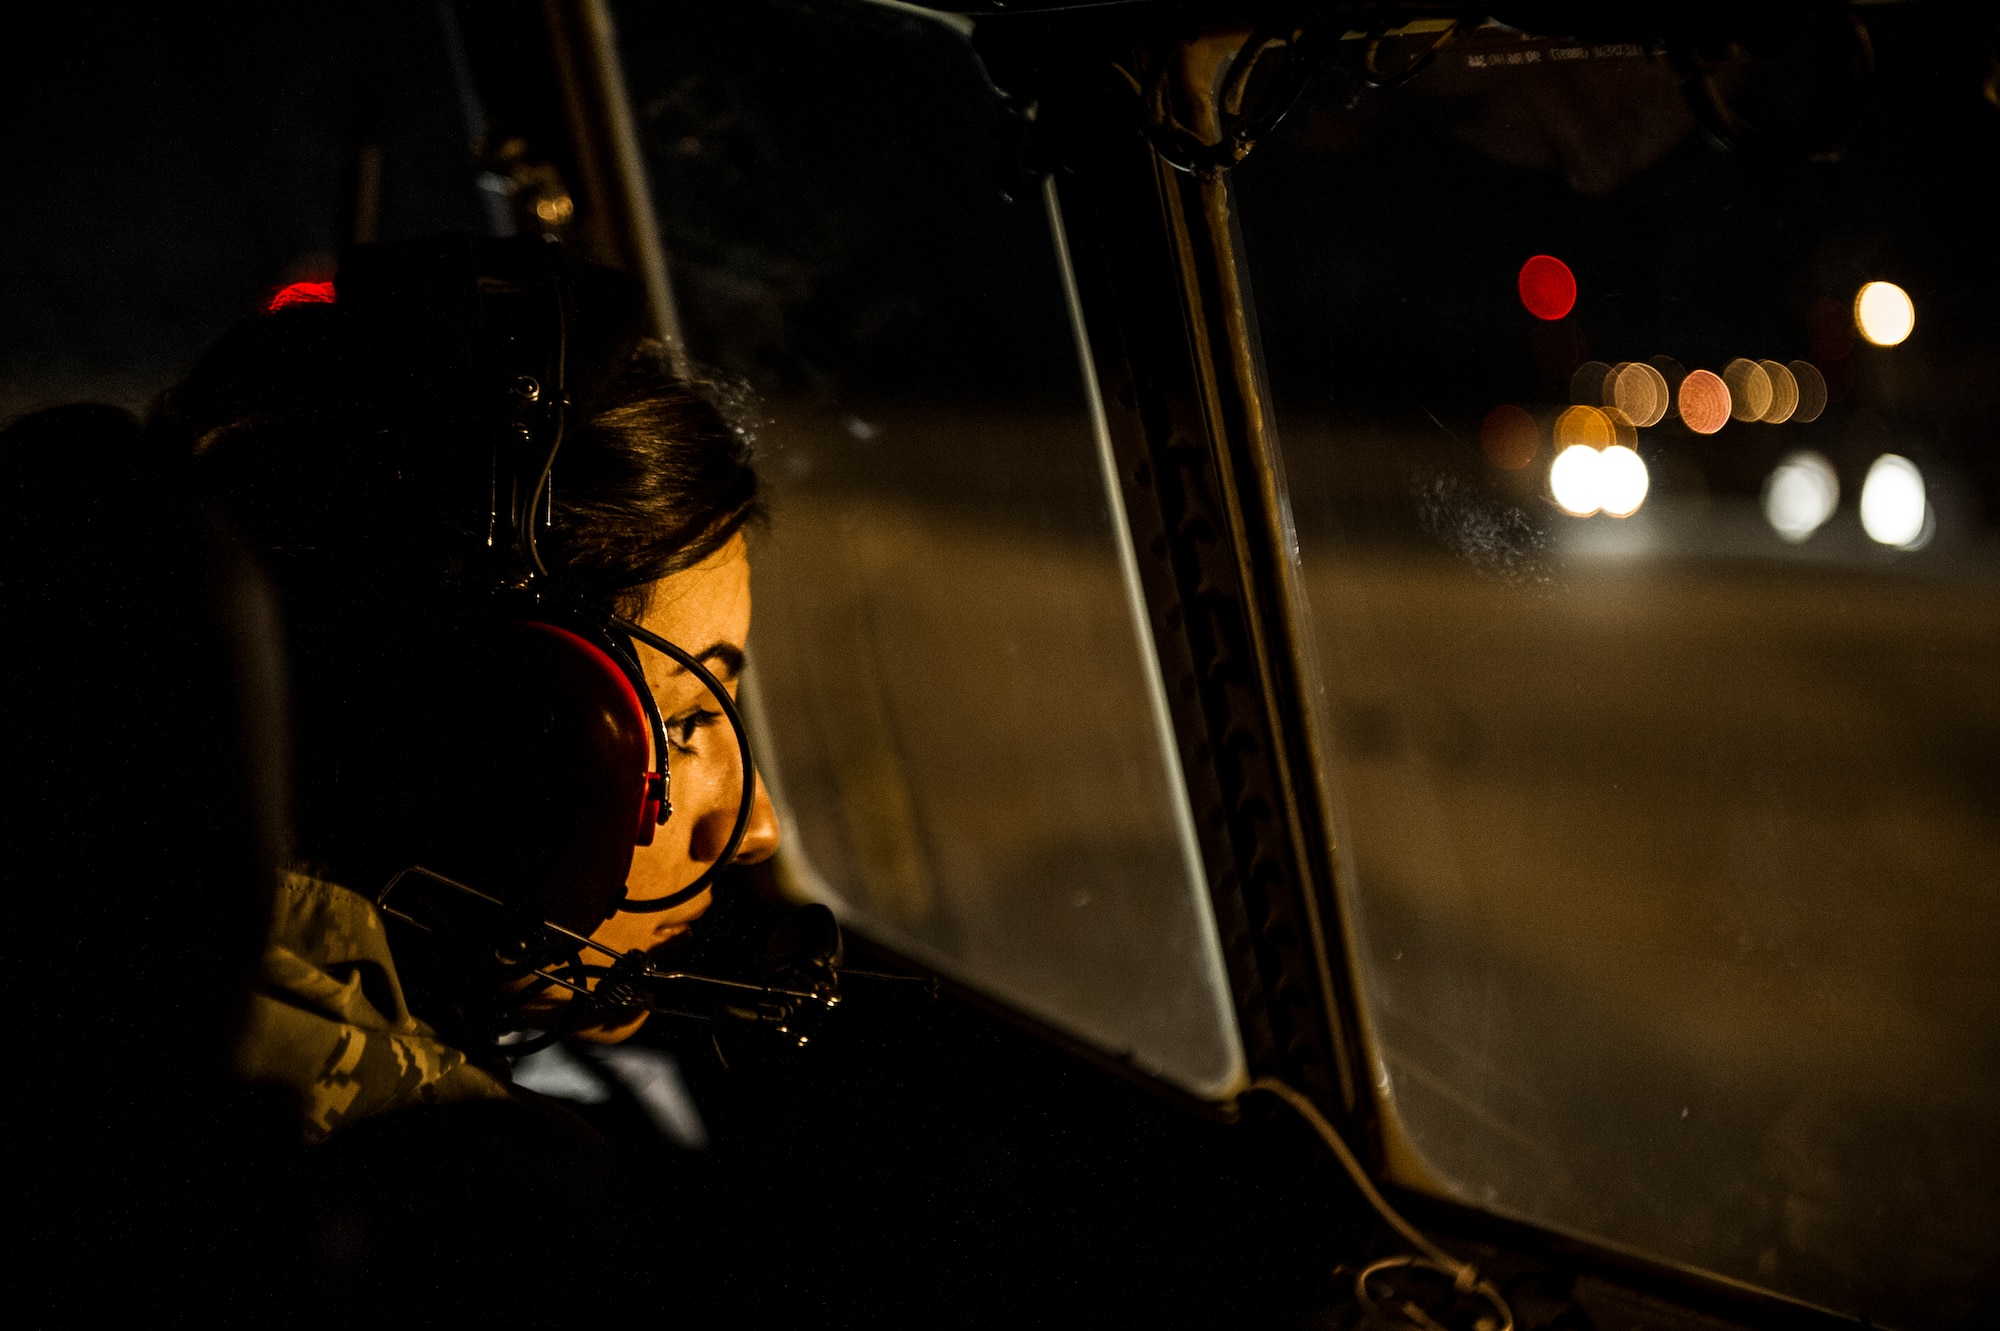 U.S. Air Force Senior Airman Nathalyn Lennon, a crew chief of the 4th Aircraft Maintenance Unit, stares out a cock-pit window of an AC-130U gunship while towing the aircraft to a new location on the flightline at Hurlburt Field, Fla., Feb. 20, 2013. One person has to work the brakes of the aircraft while another uses a vehicle to position the aircraft in its new location. (U.S. Air Force photo/Airman 1st Class Christopher Callaway) 